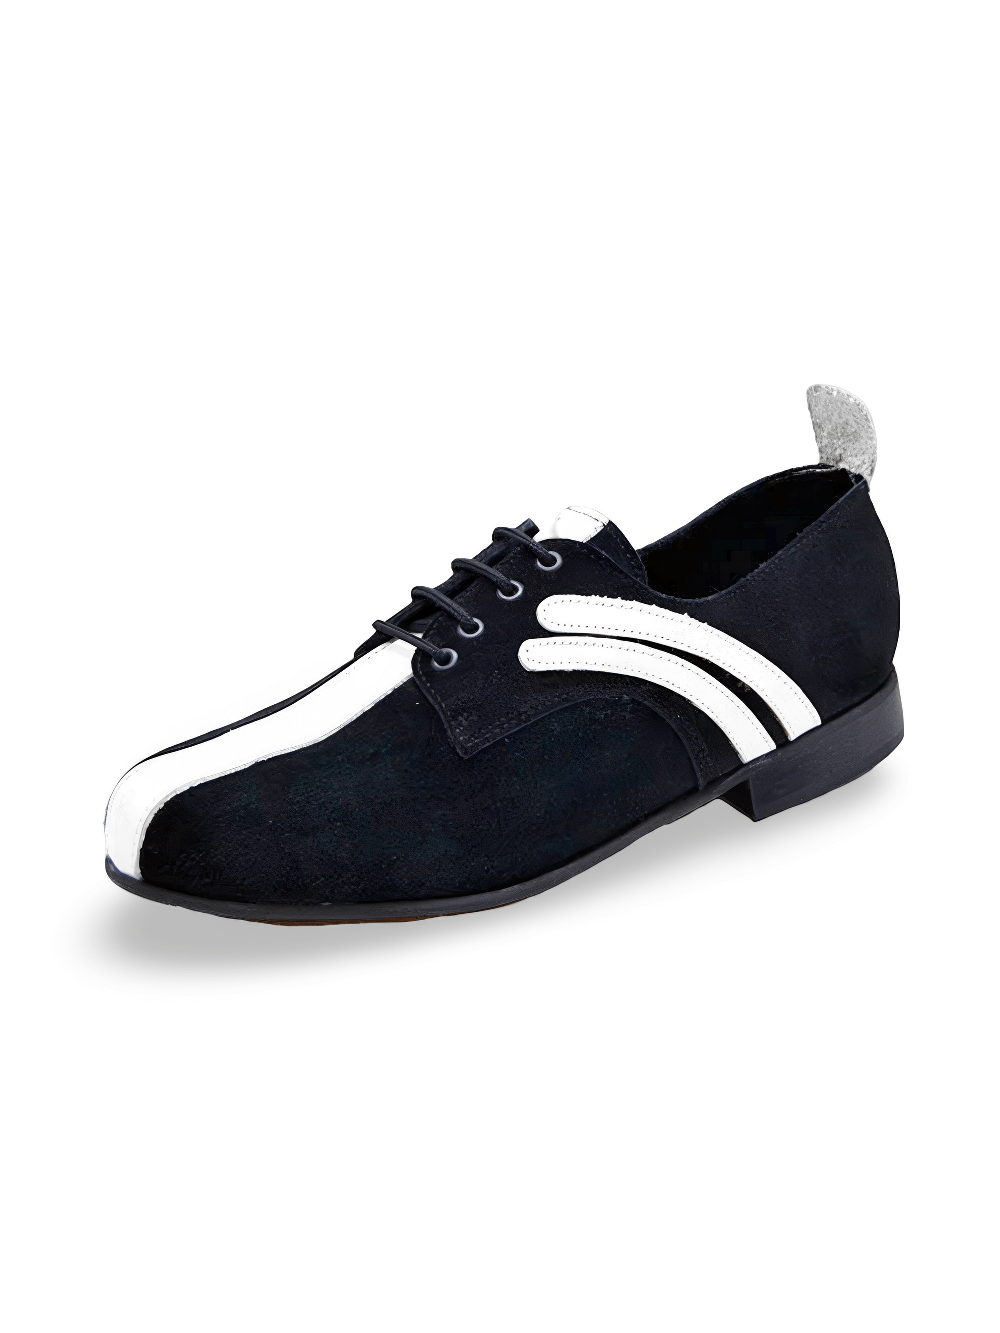 Classic Unisex Black and White Leather Bowling Shoes